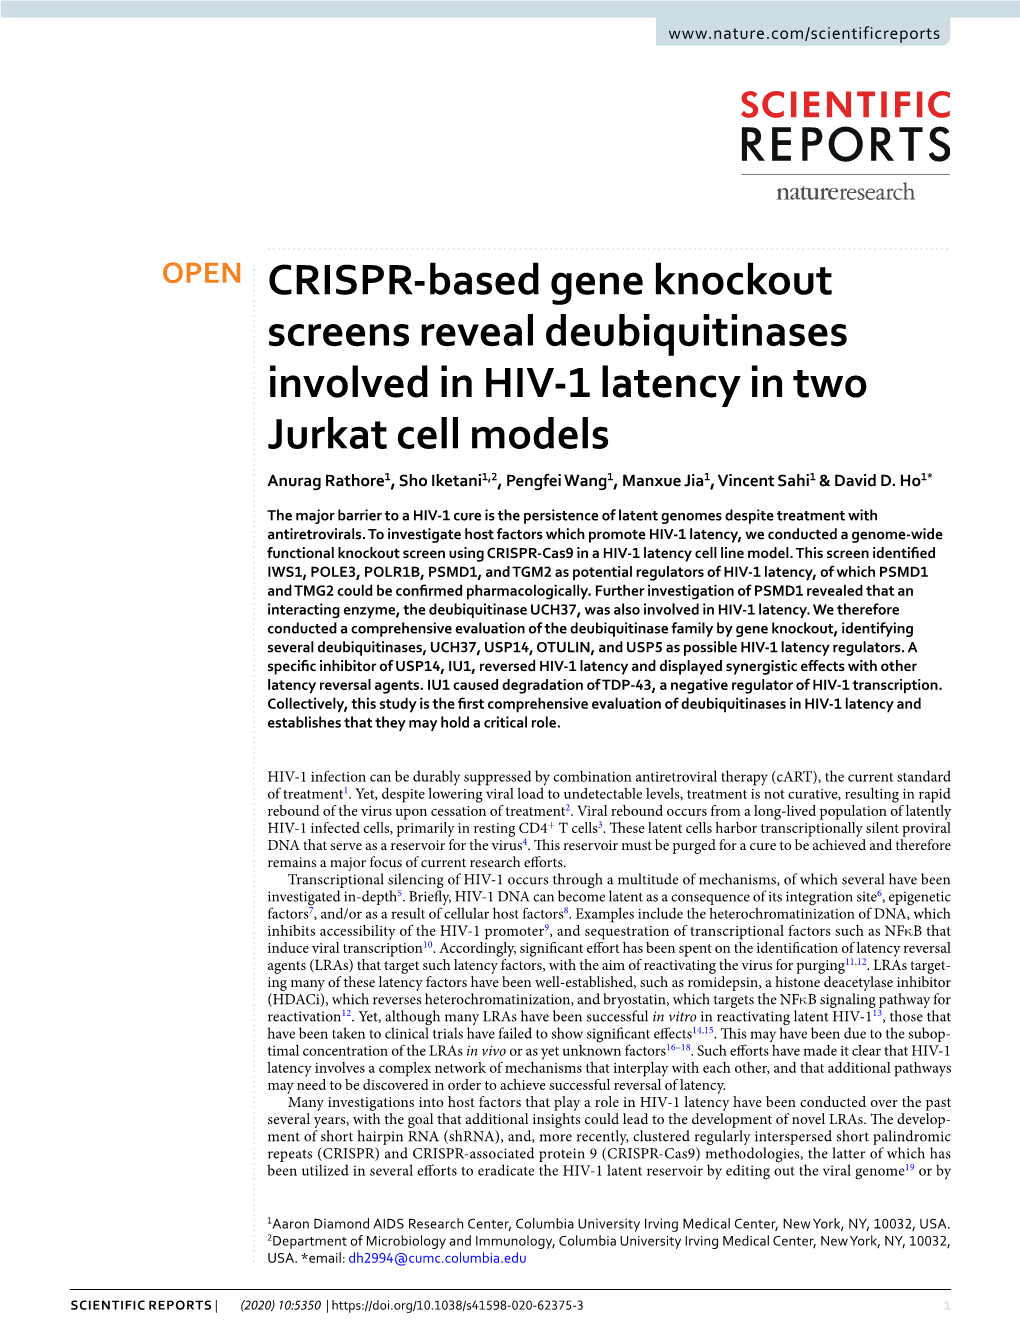 CRISPR-Based Gene Knockout Screens Reveal Deubiquitinases Involved in HIV-1 Latency in Two Jurkat Cell Models